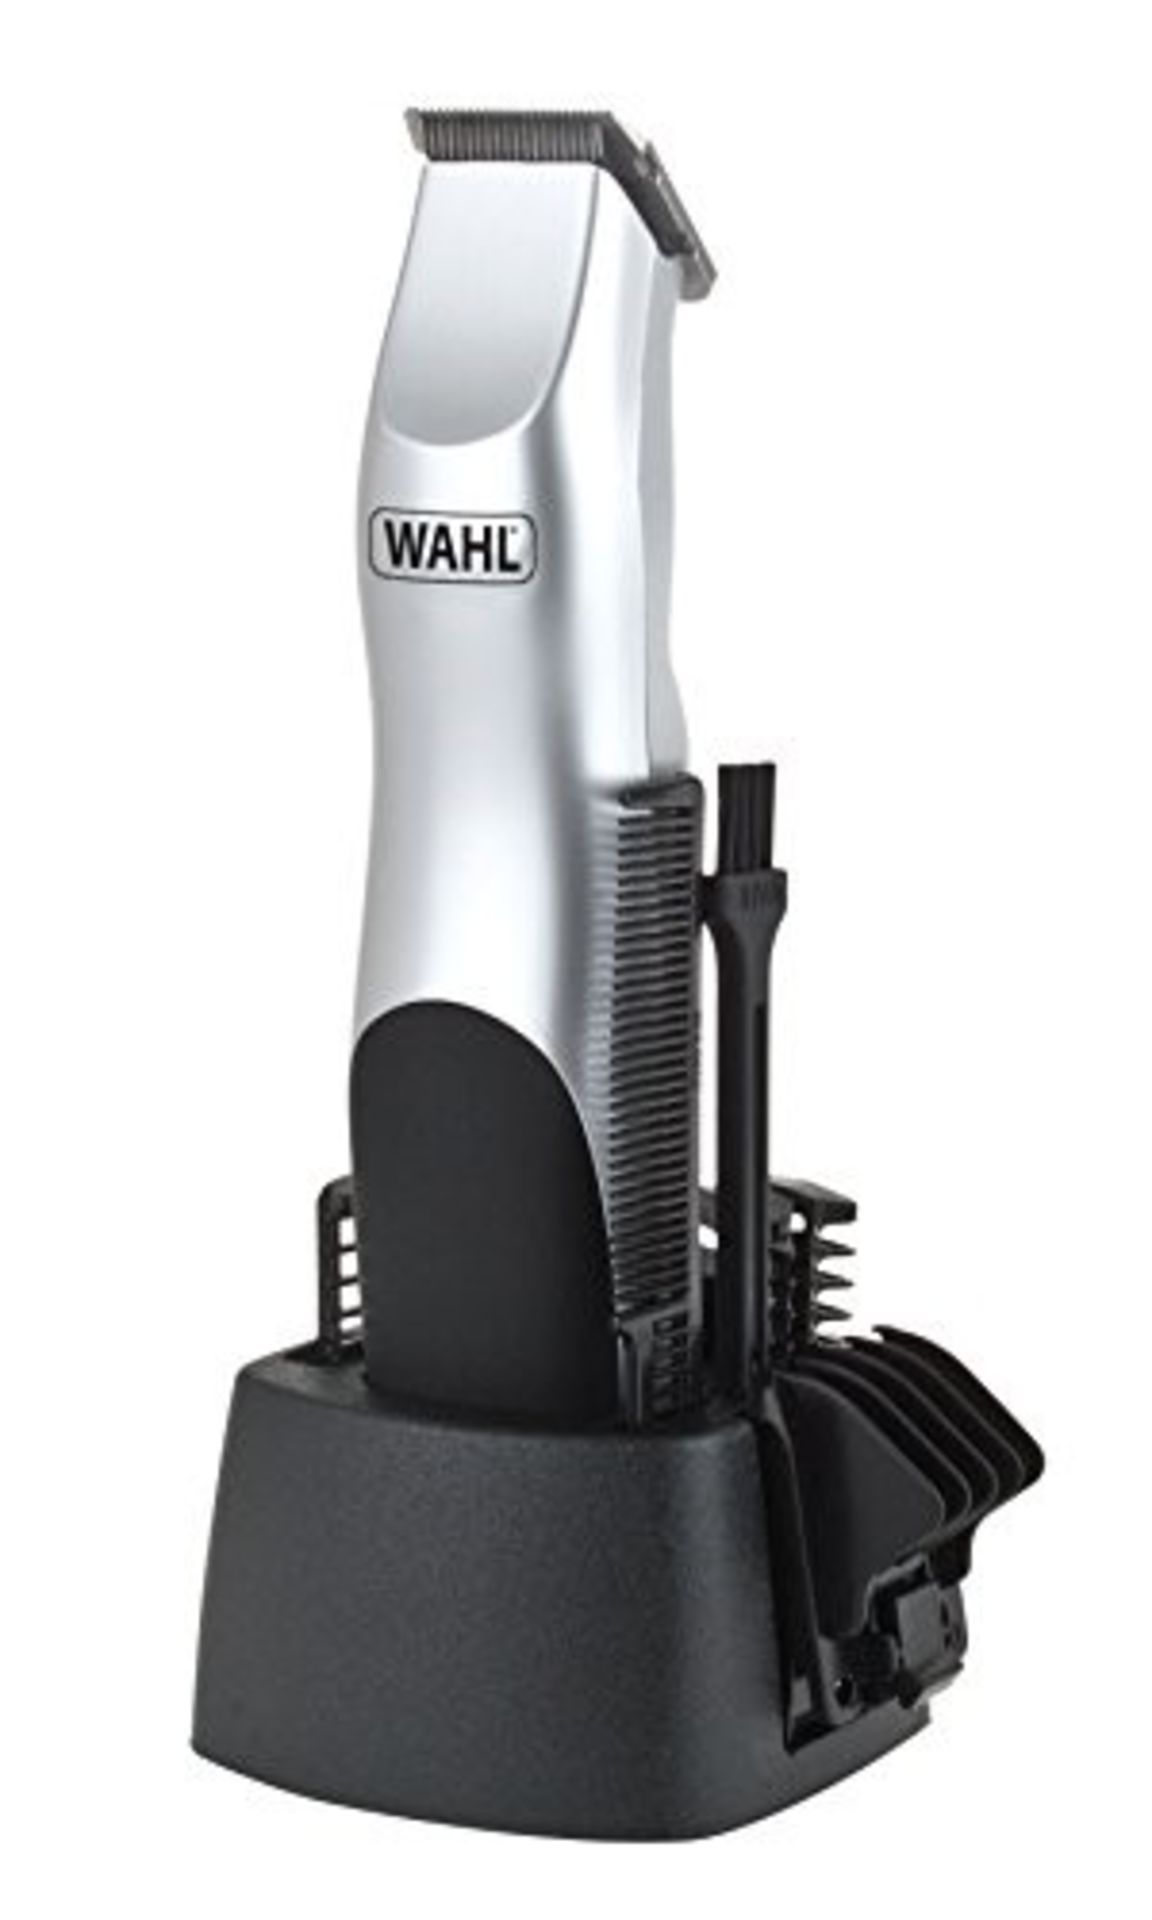 COMBINED RRP £118.00 LOT TO CONTAIN 8 ASSORTED Personal Care Appliances: GroomEase, Wahl, Wahl, - Image 3 of 9